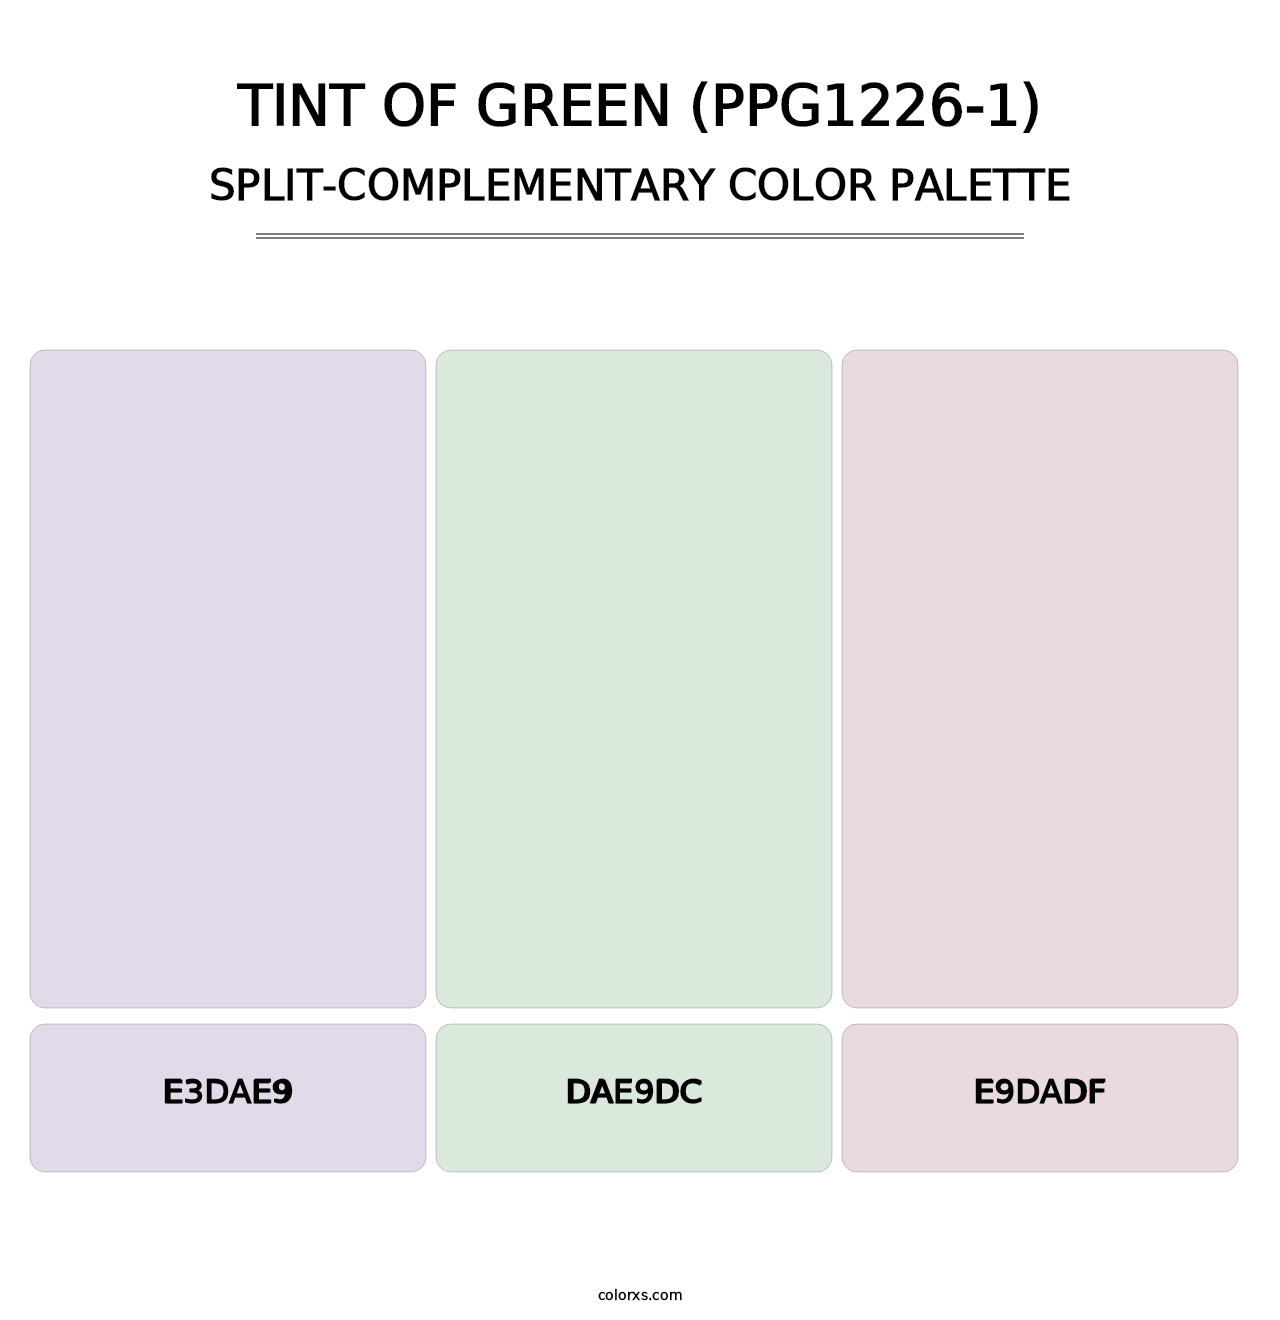 Tint Of Green (PPG1226-1) - Split-Complementary Color Palette